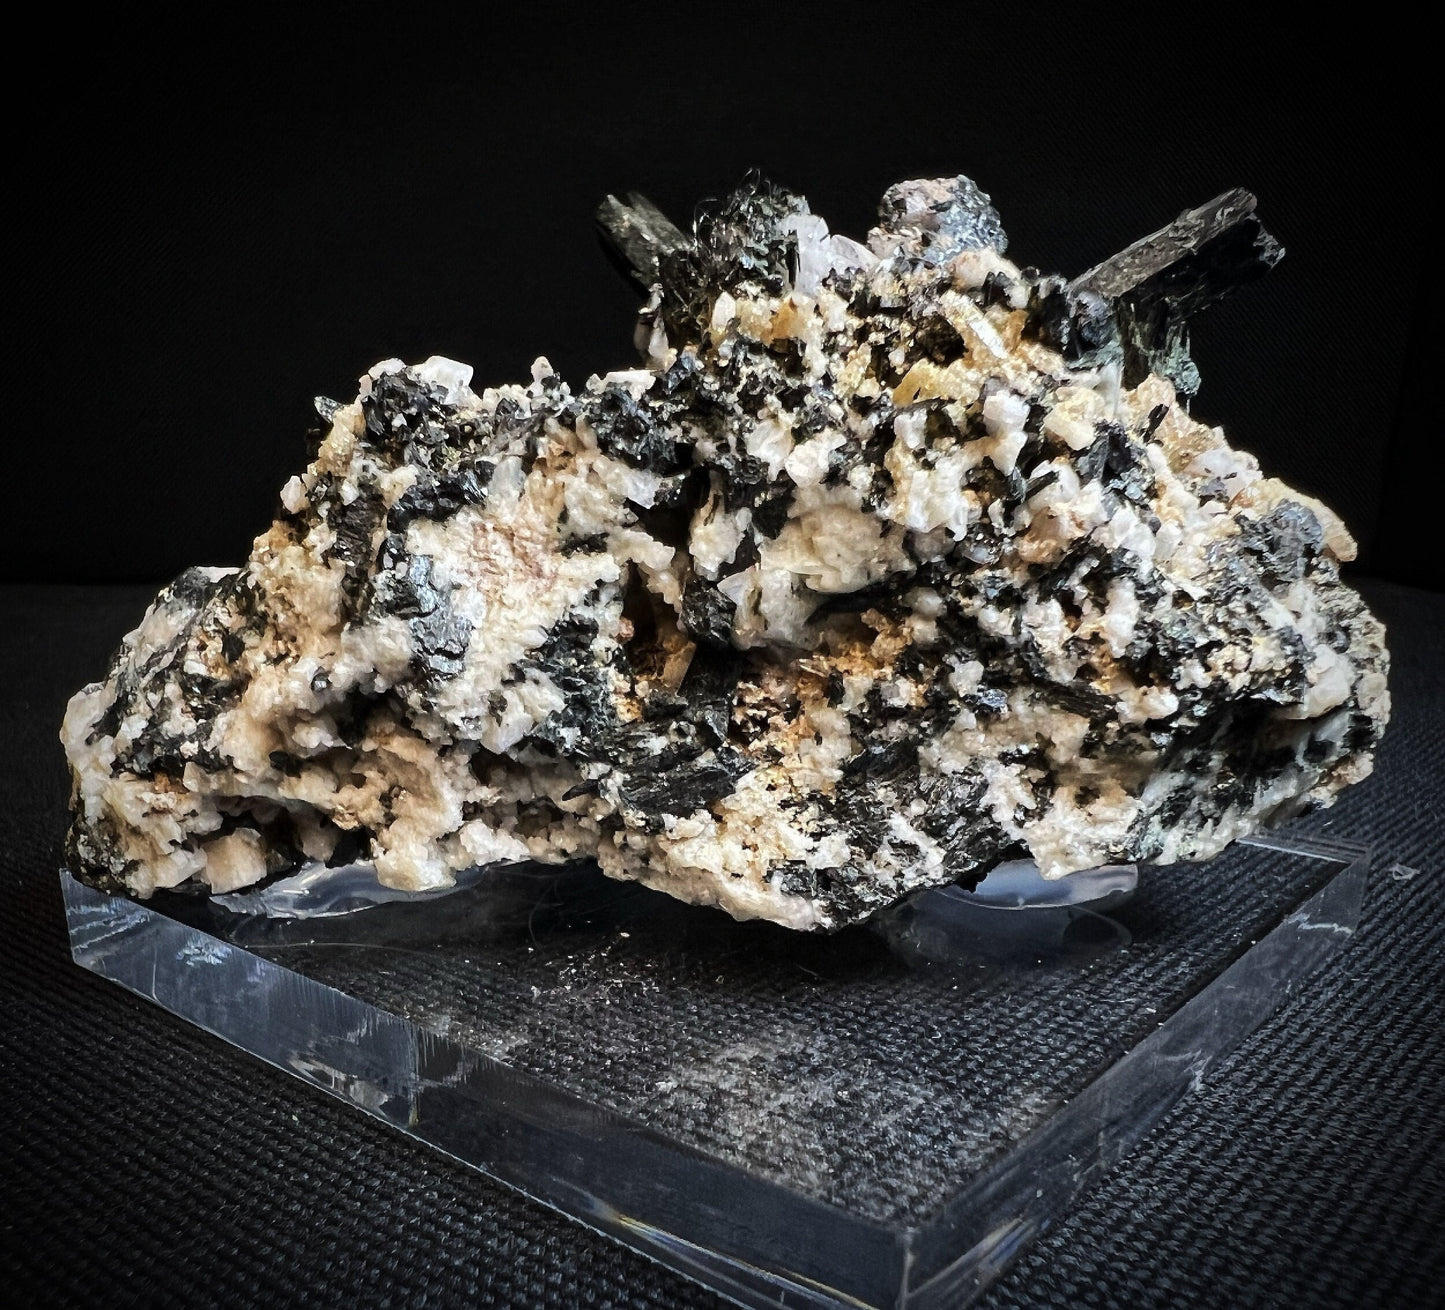 Aegirine With Feldspar From Mount Malosa, Zomba, Malawi- Collectors Piece, Statement Piece, Home Décor, Crystal (Stand Included)